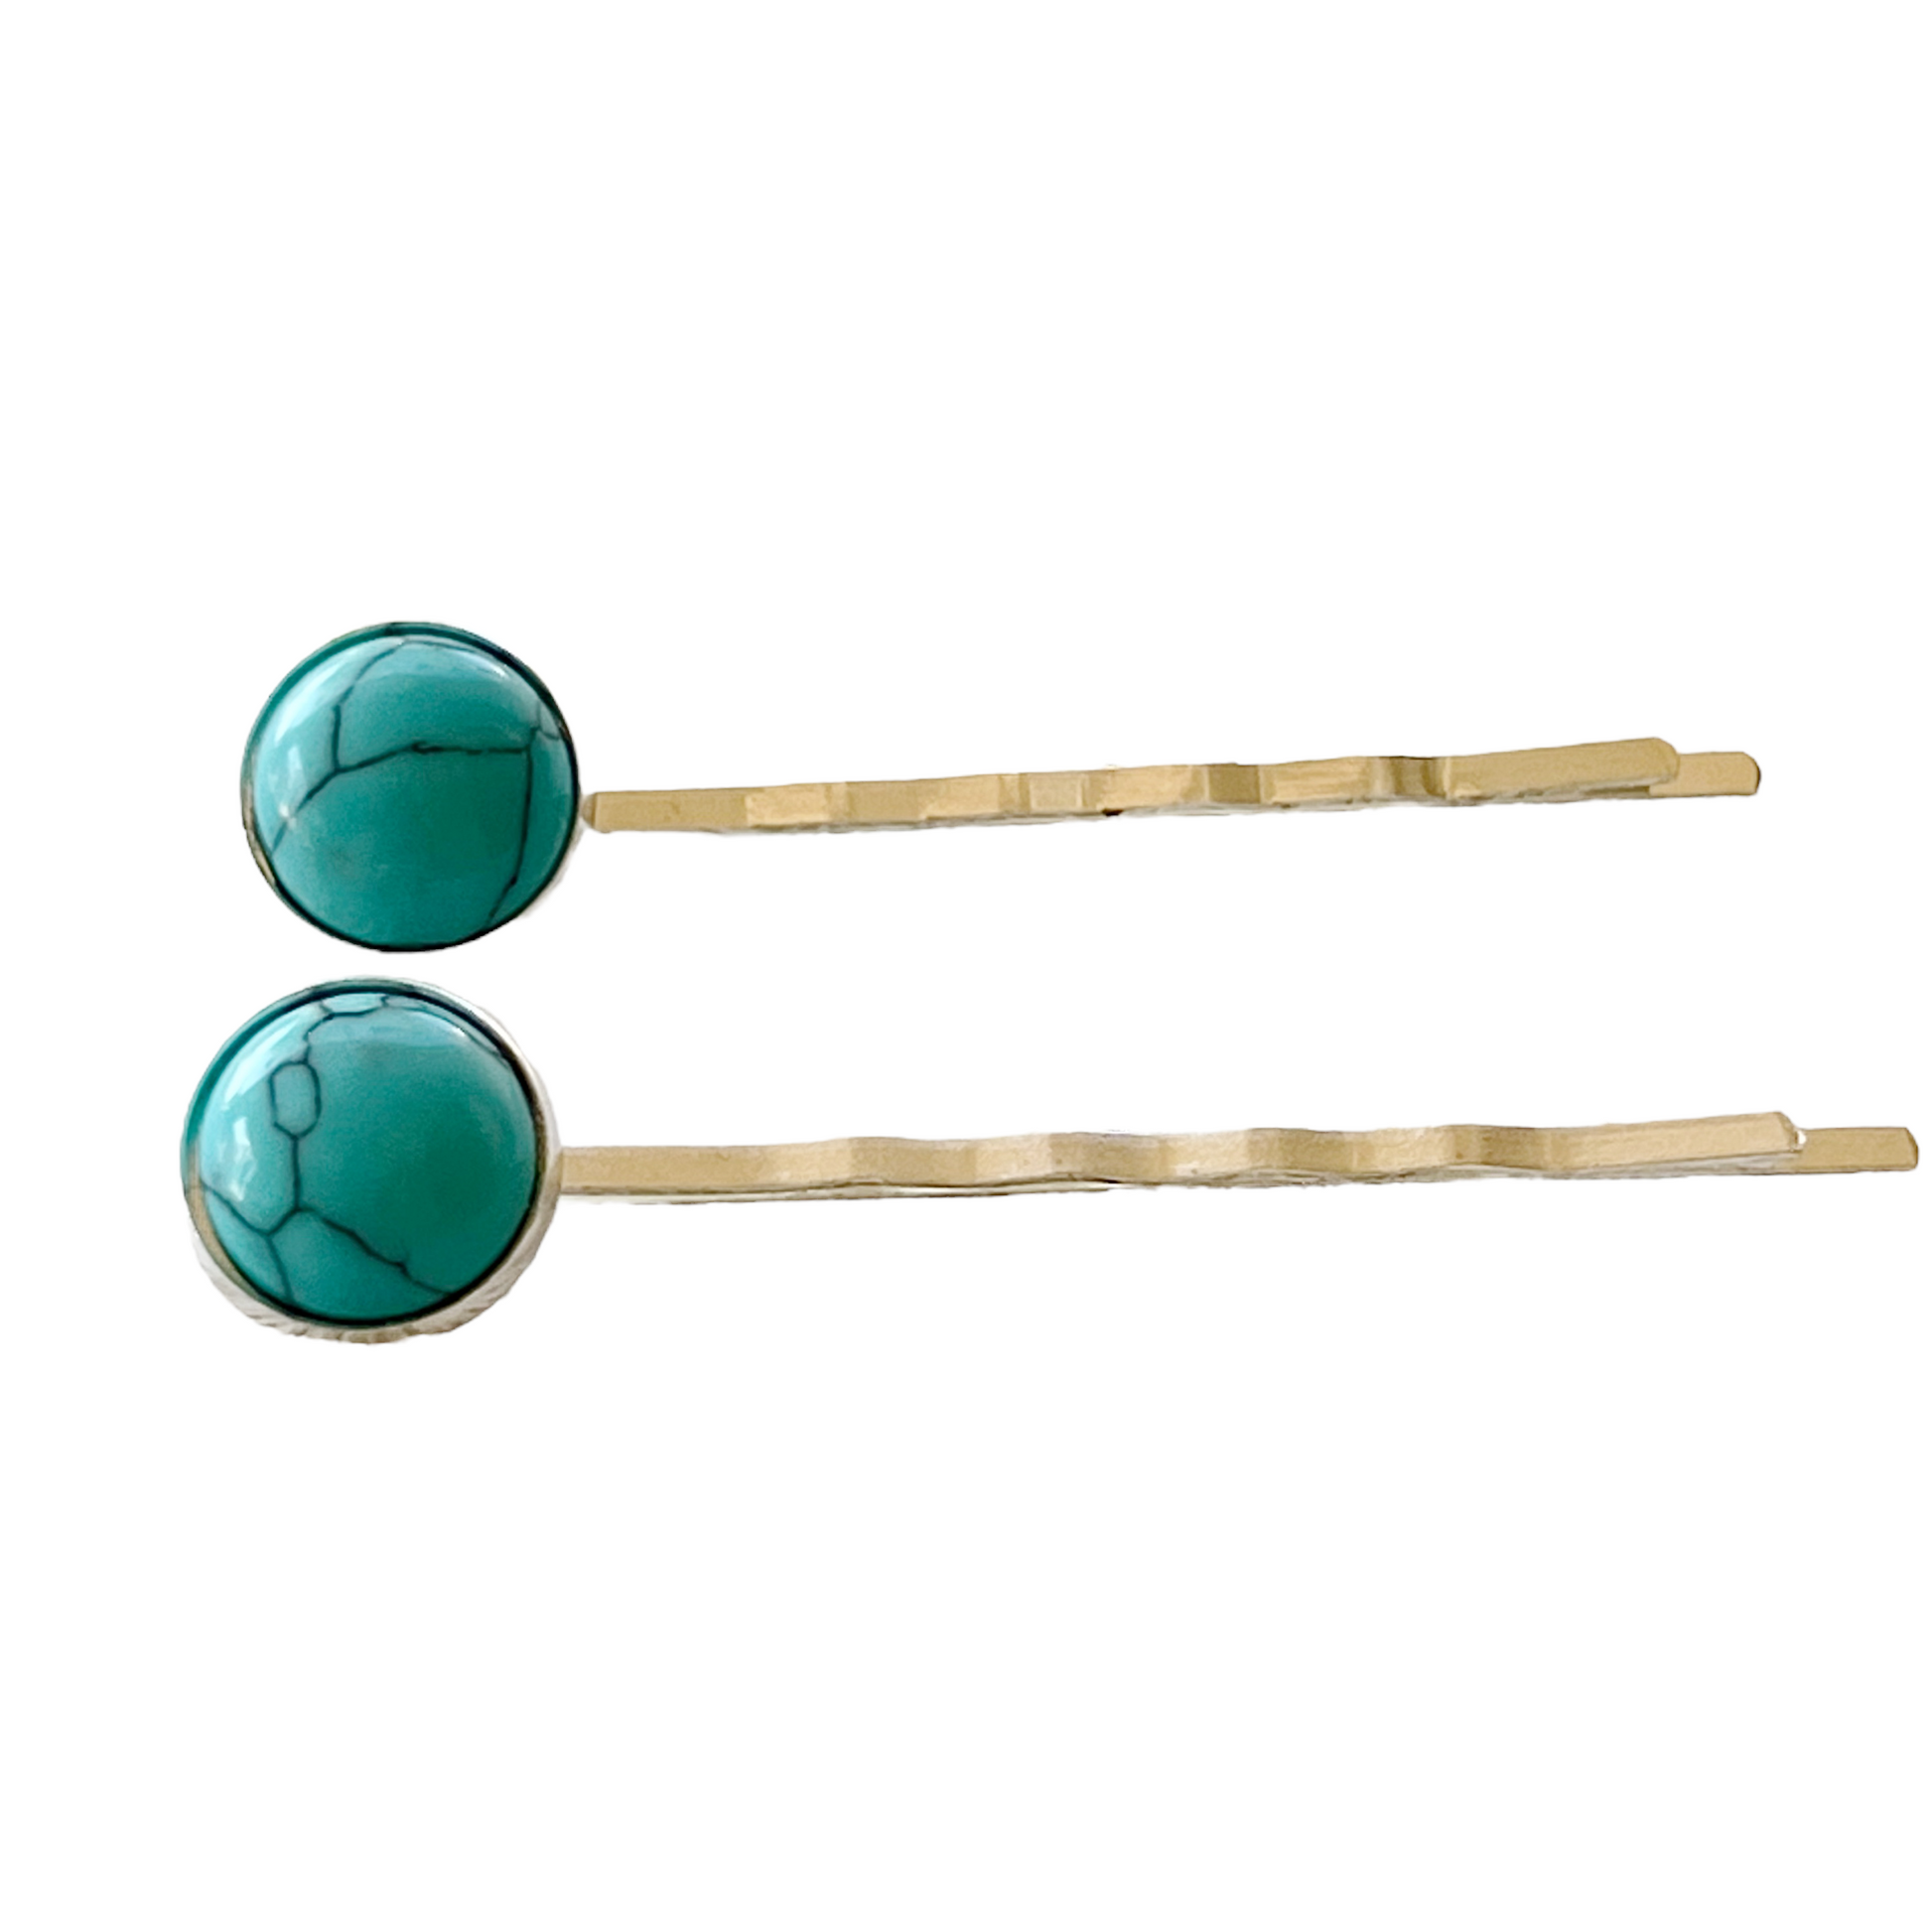 Boho Western Turquoise Silver Hair Pins - Stylish Accessories with a Western Flair